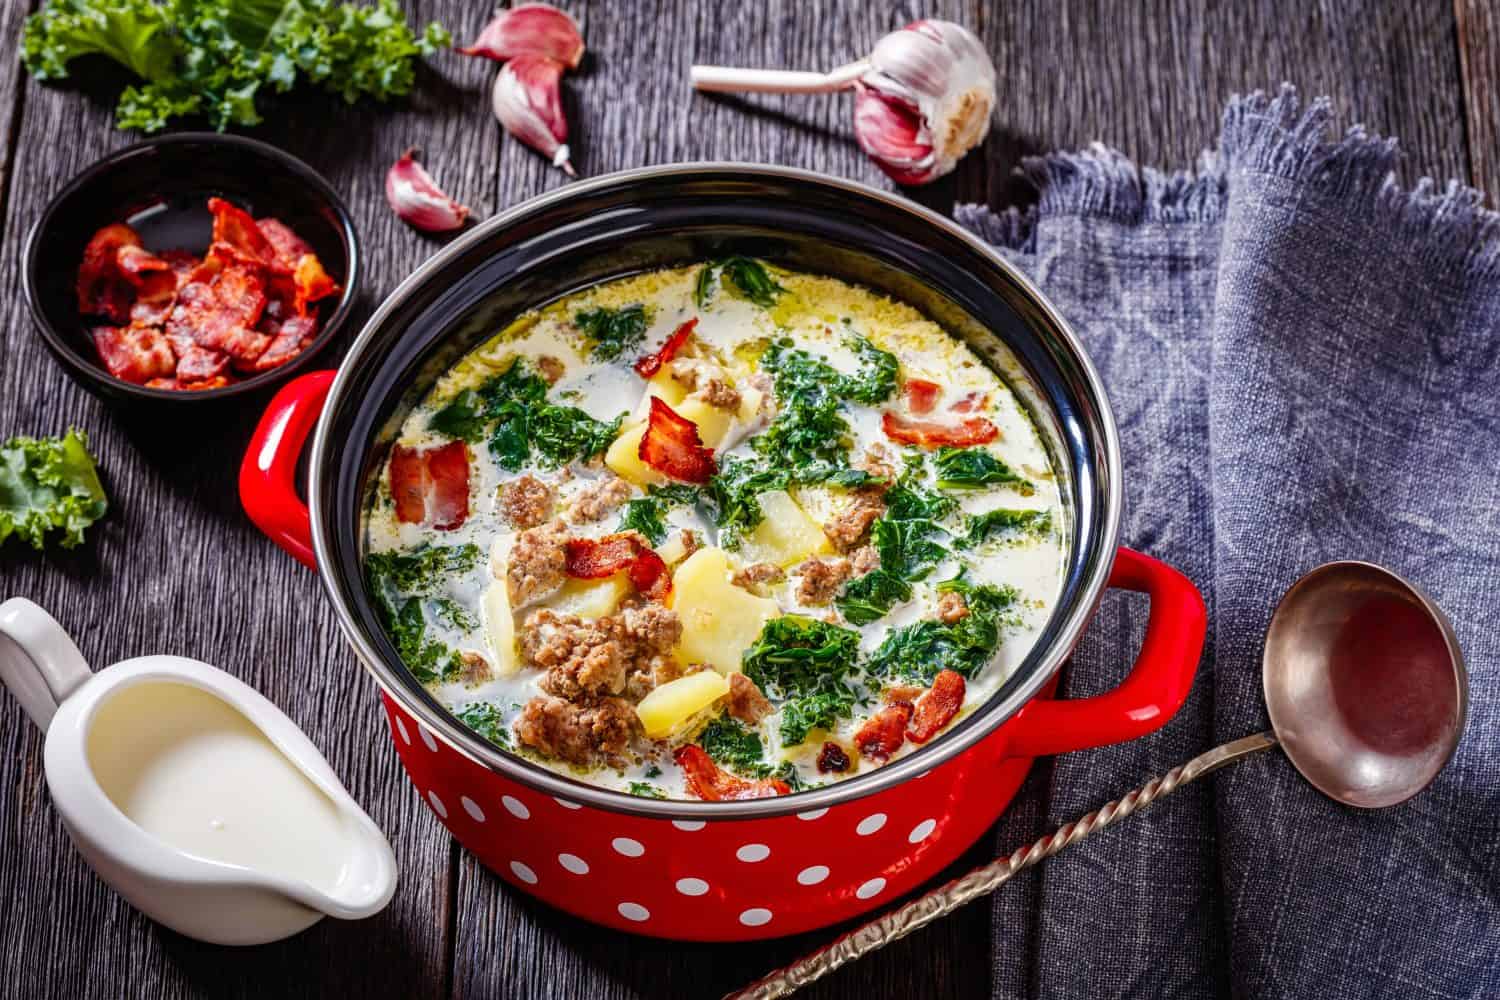 Zuppa Toscana, hearty Tuscan Soup loaded with Italian sausage, kale, bacon and potatoes in red pot on dark wooden table